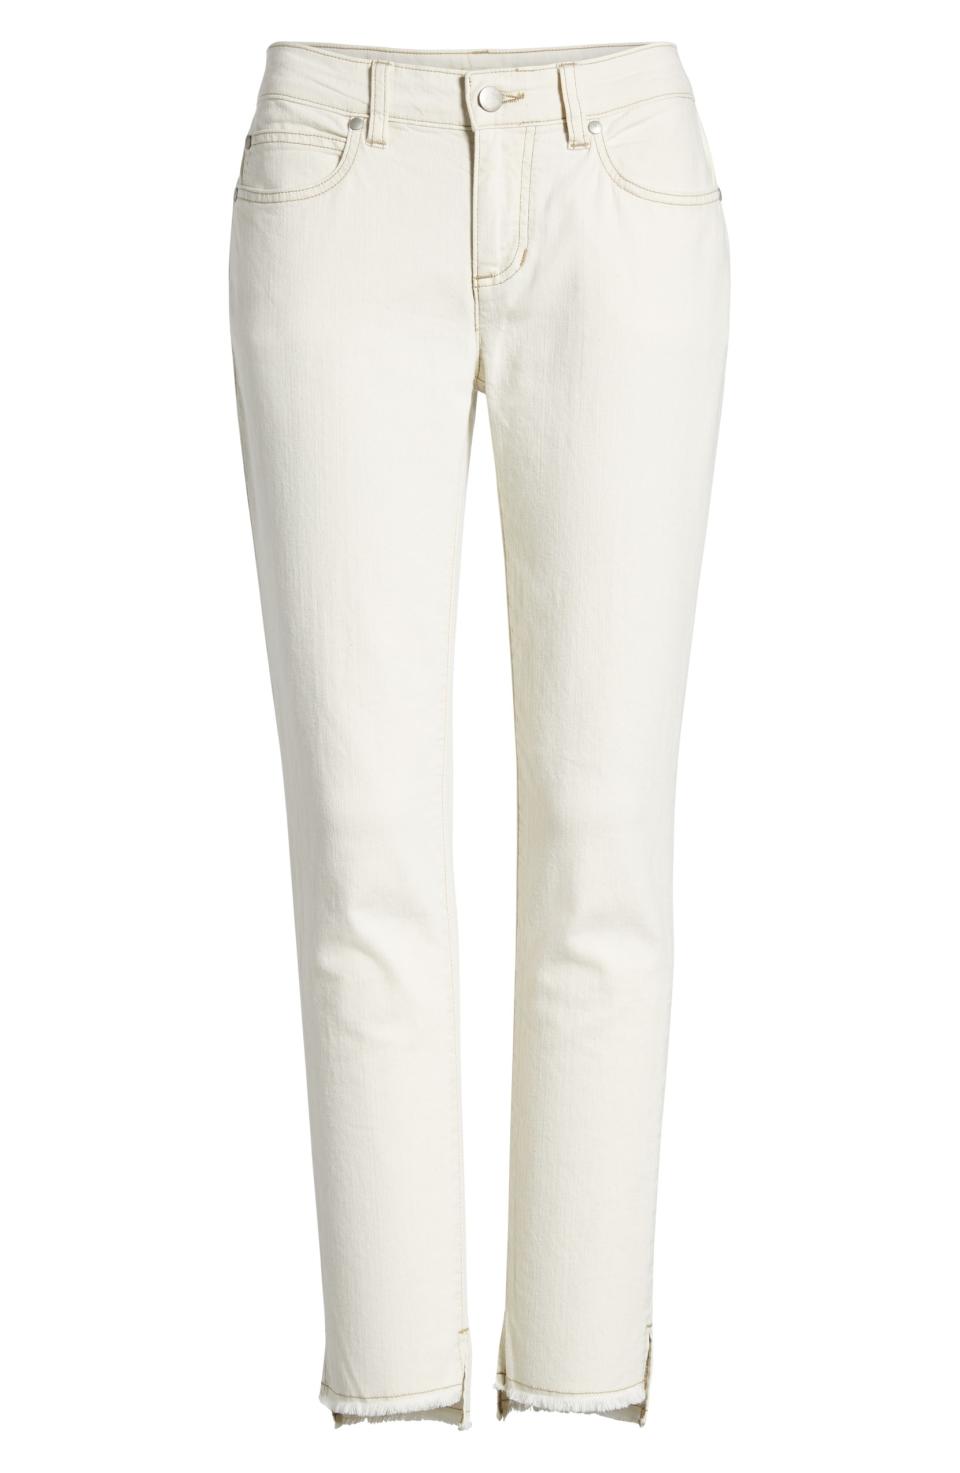 Eileen Fisher Stretch Organic Cotton Slim Ankle Jeans, $178 $118.90, Nordstrom